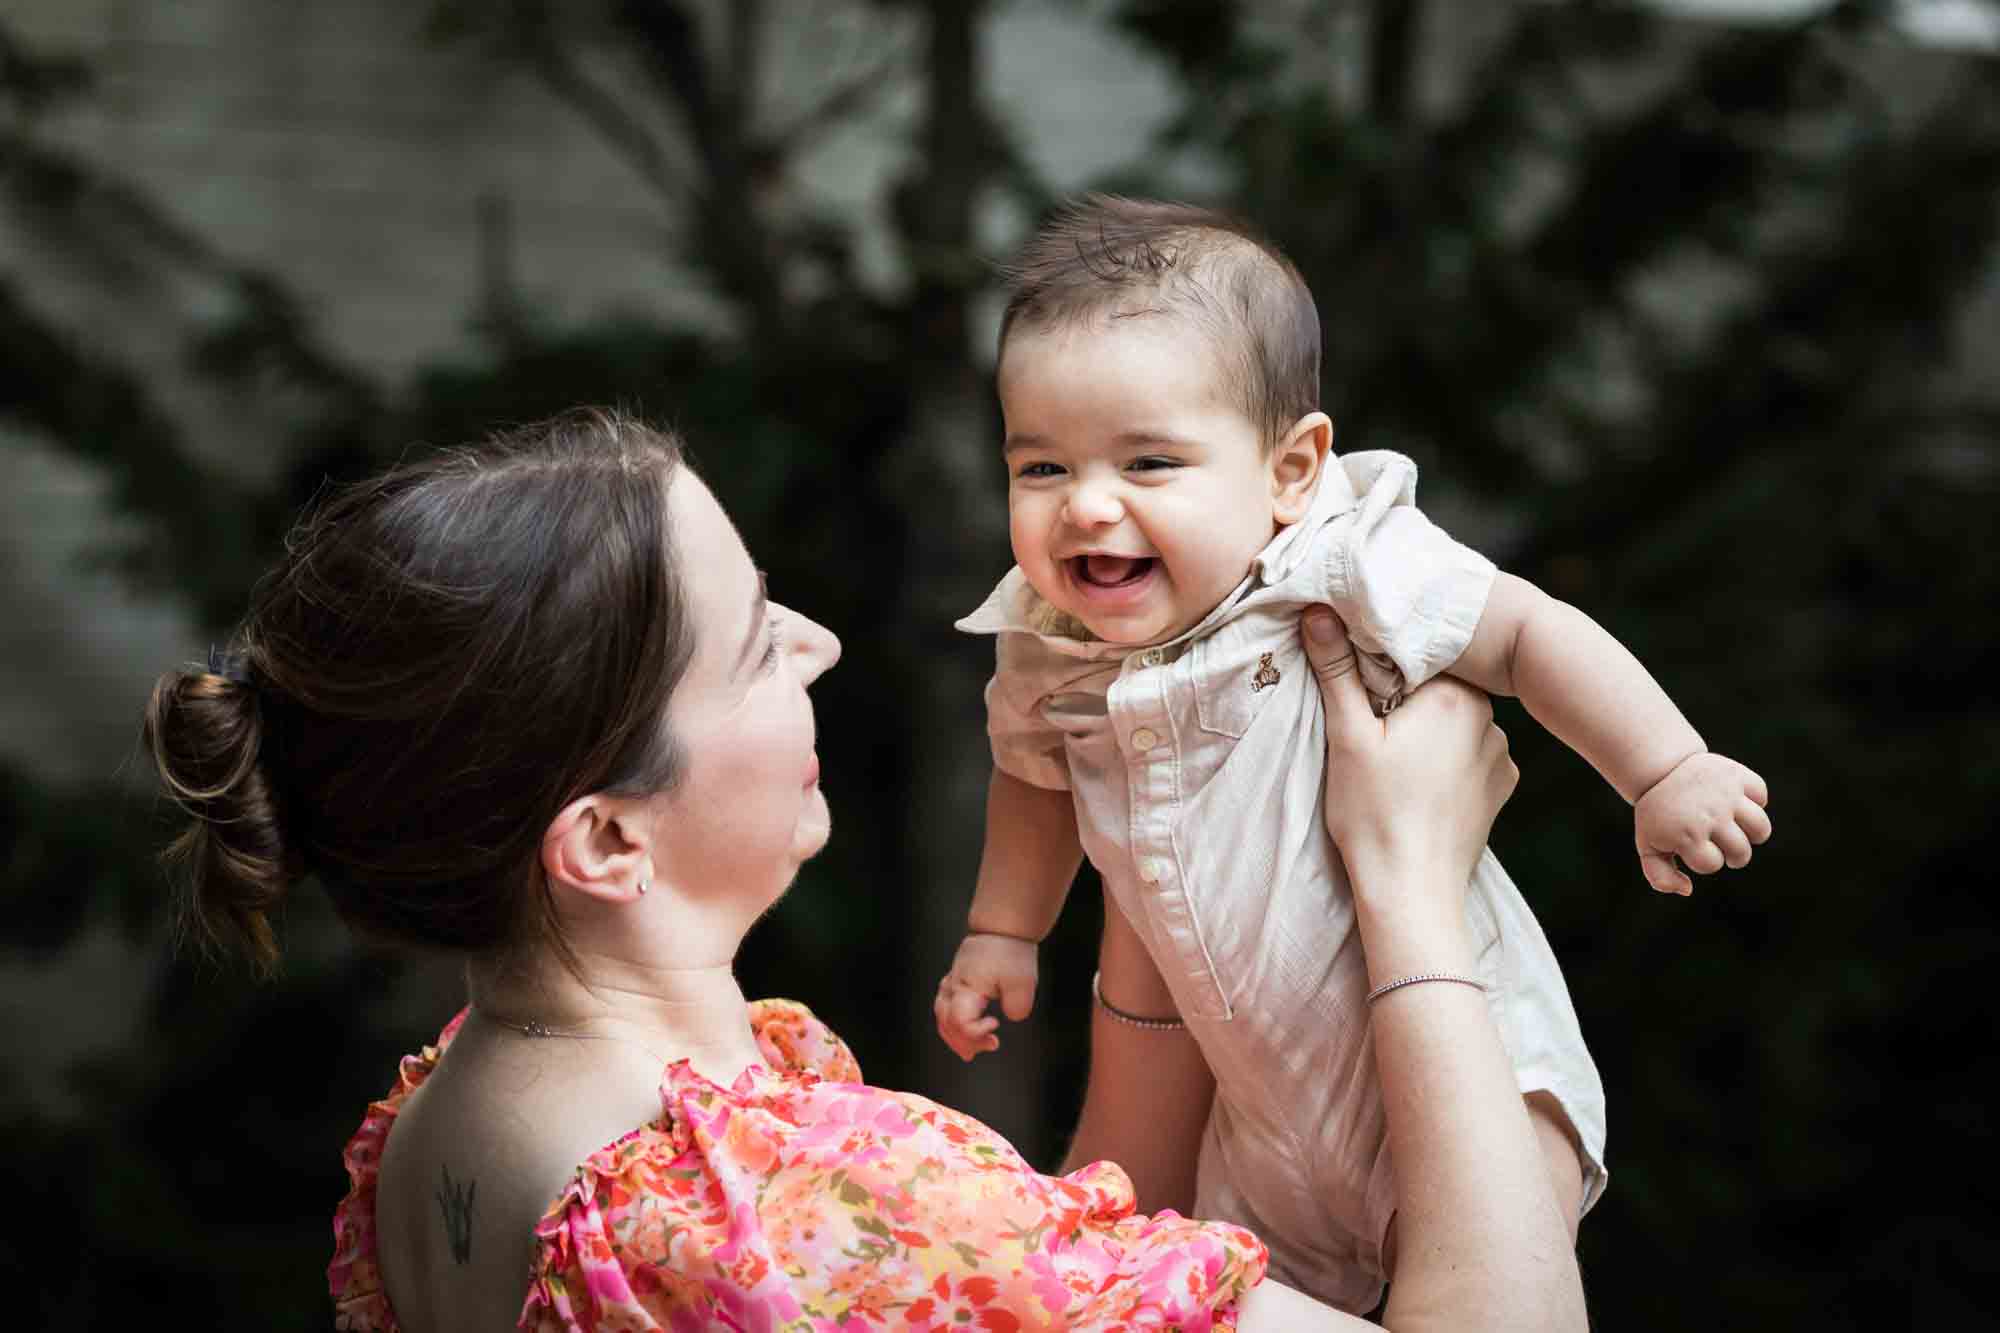 Mother in red floral dress holding baby boy during a Brooklyn Commons family portrait session